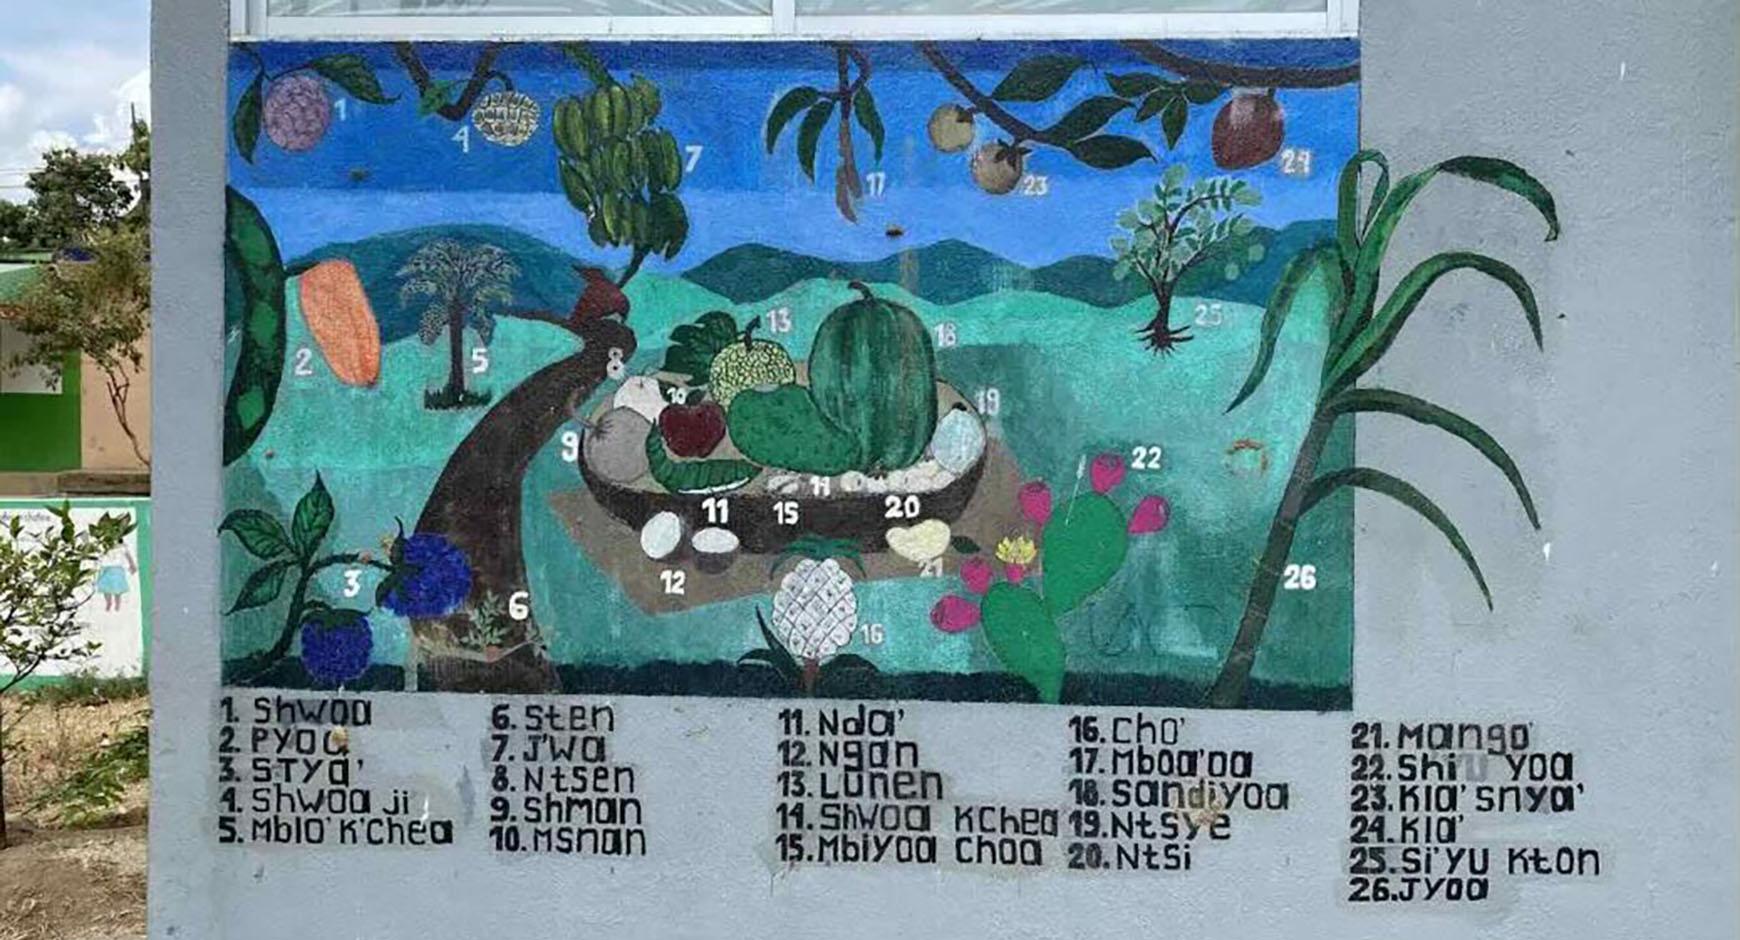 mural in oaxaca depicting a table with fruit and legend indicating the indigenous word for each item